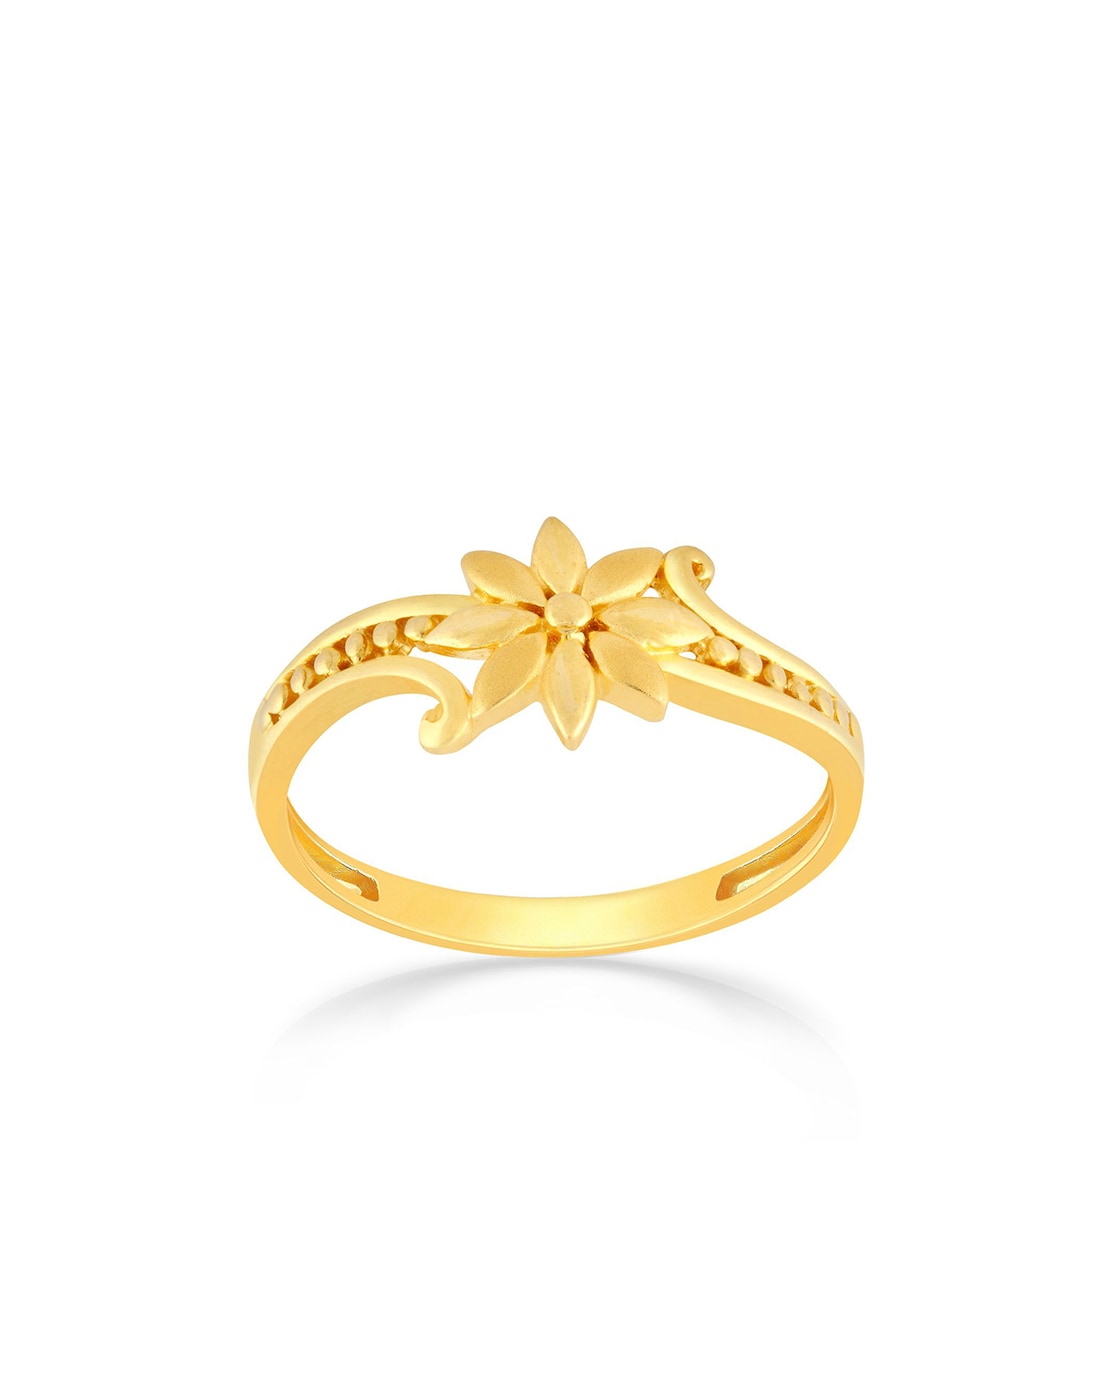 Buy 22kt Gold Single Stone Ring in I 1/2 at PureJewels UK